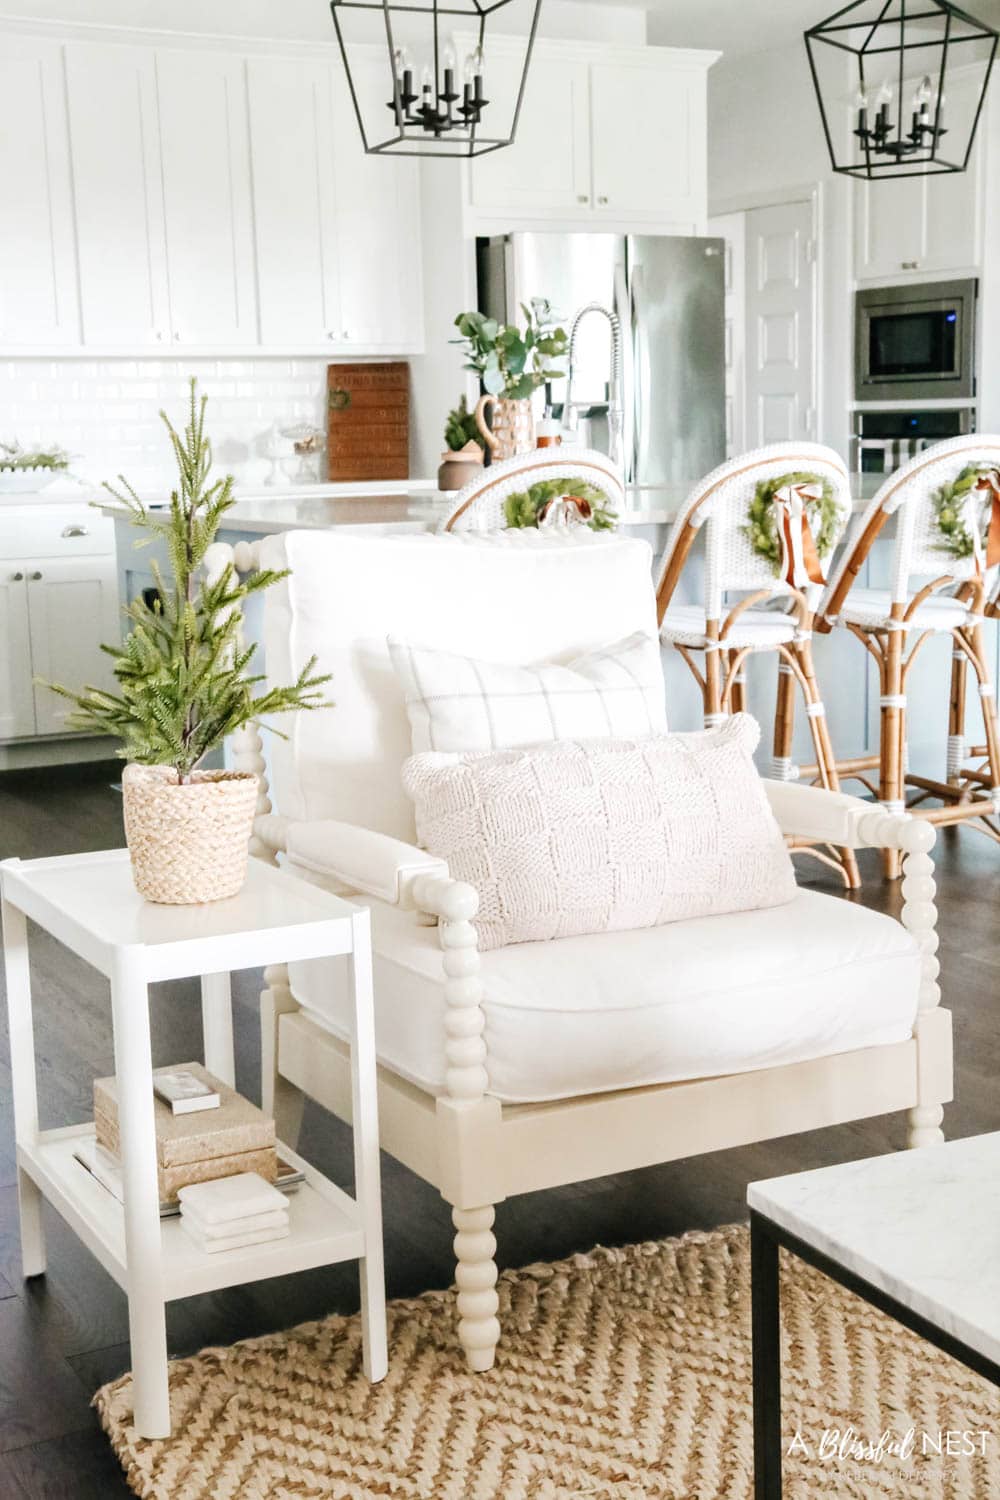 White spindle chair with neutral pillows and white side table with mini tree in basket on top